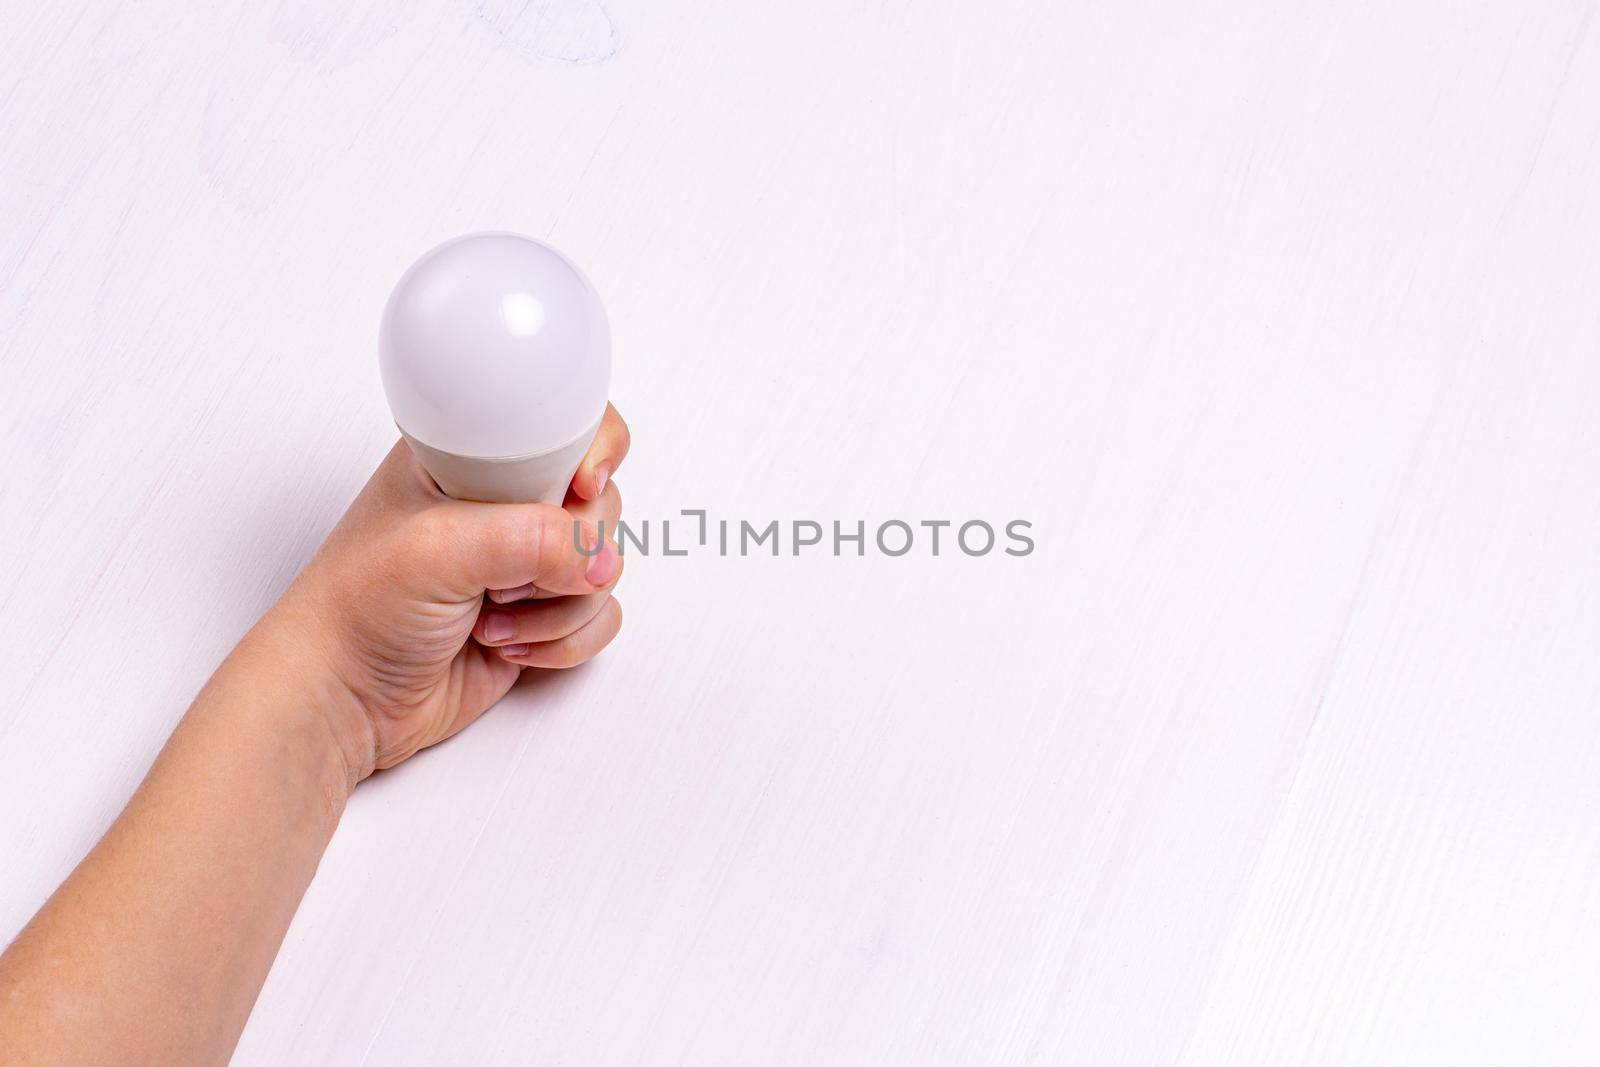 A child's hand holds an LED light bulb against a light background by bySergPo